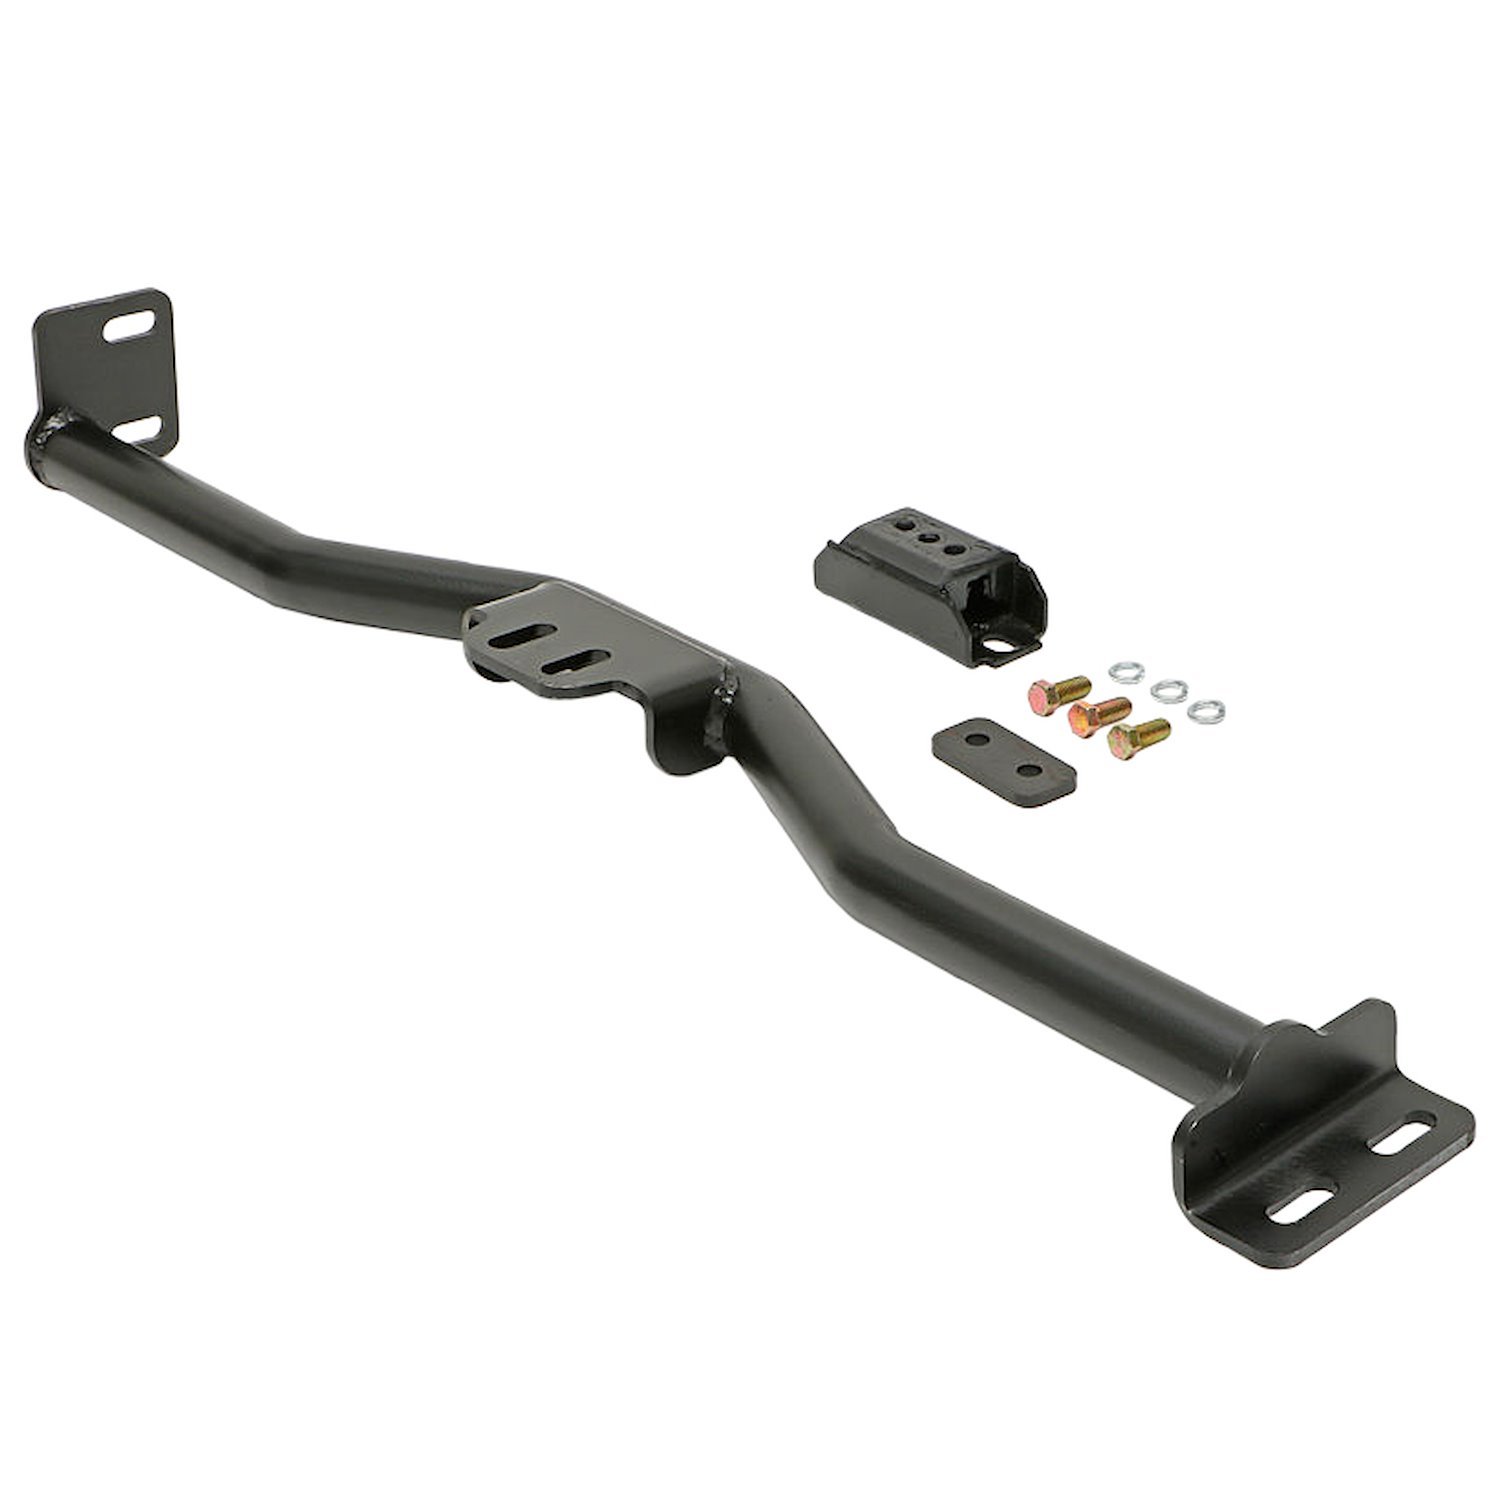 9718 Engine Swap Transmission Crossmember for TH350 or 700R4, 1982-1994 GM S10/S15 w/ Small Block Chevy (Gen 1), Bolt-In Design